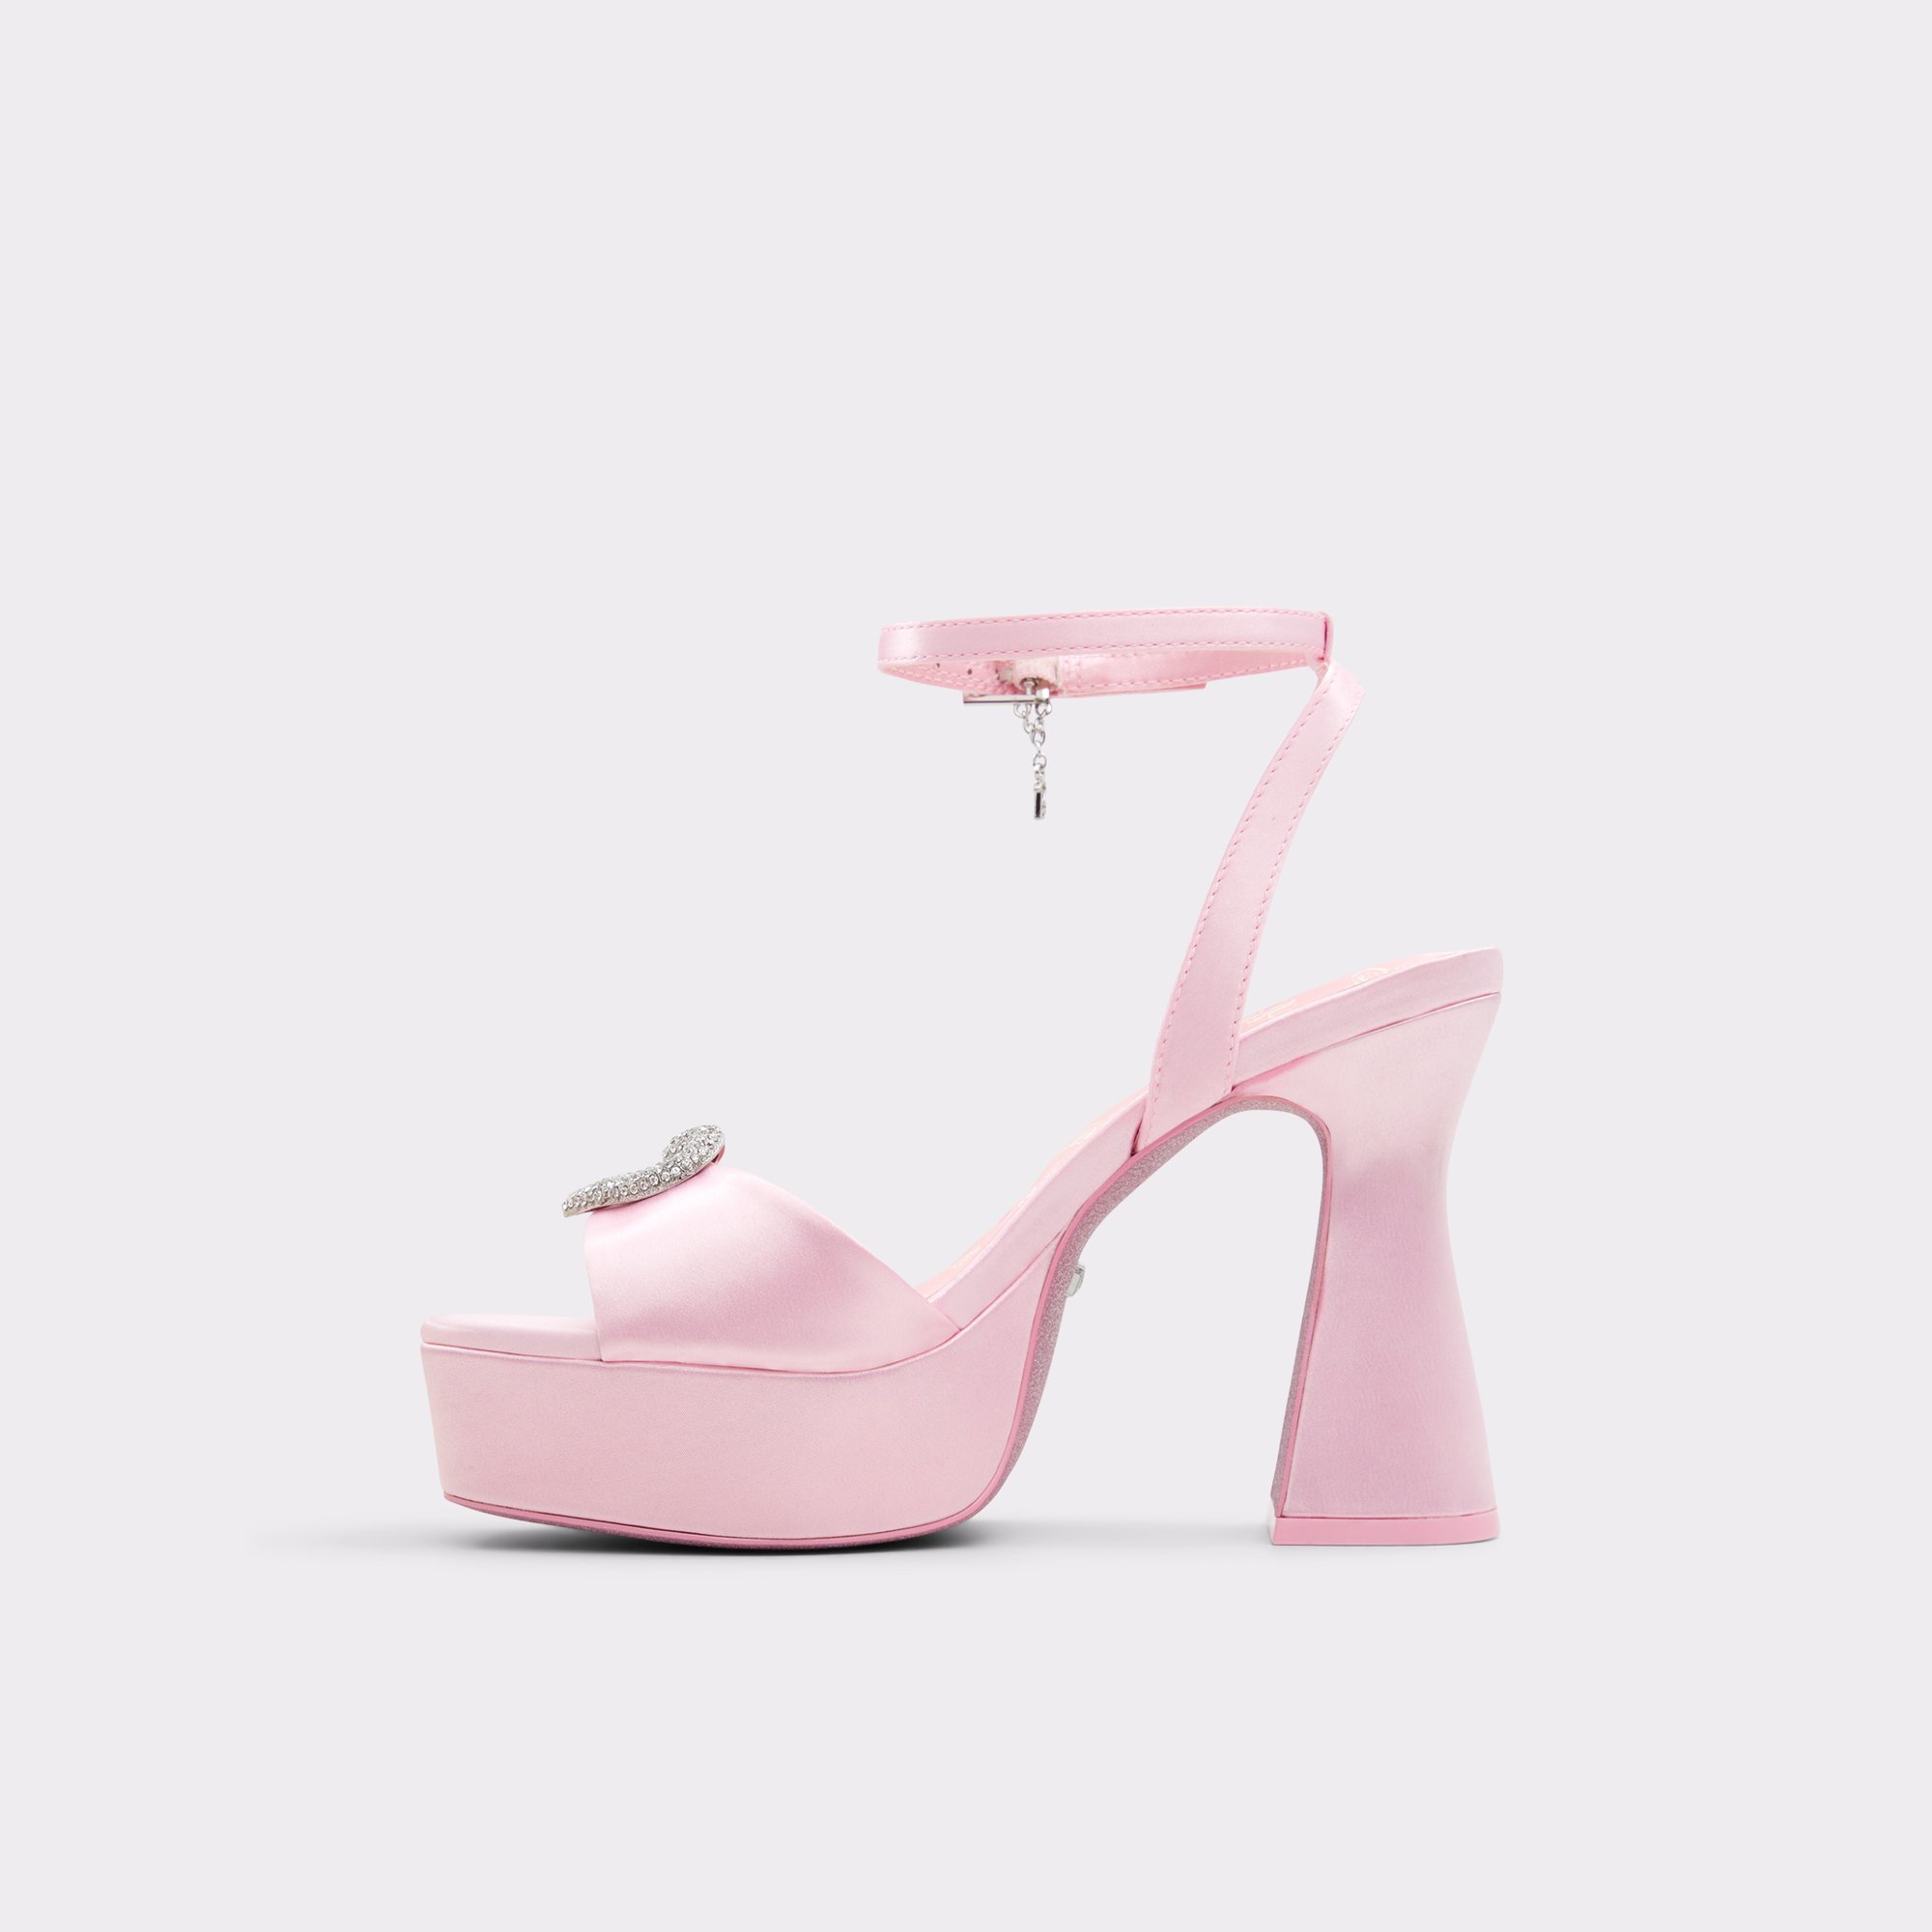 Barbie Shoes Pink Square Toe